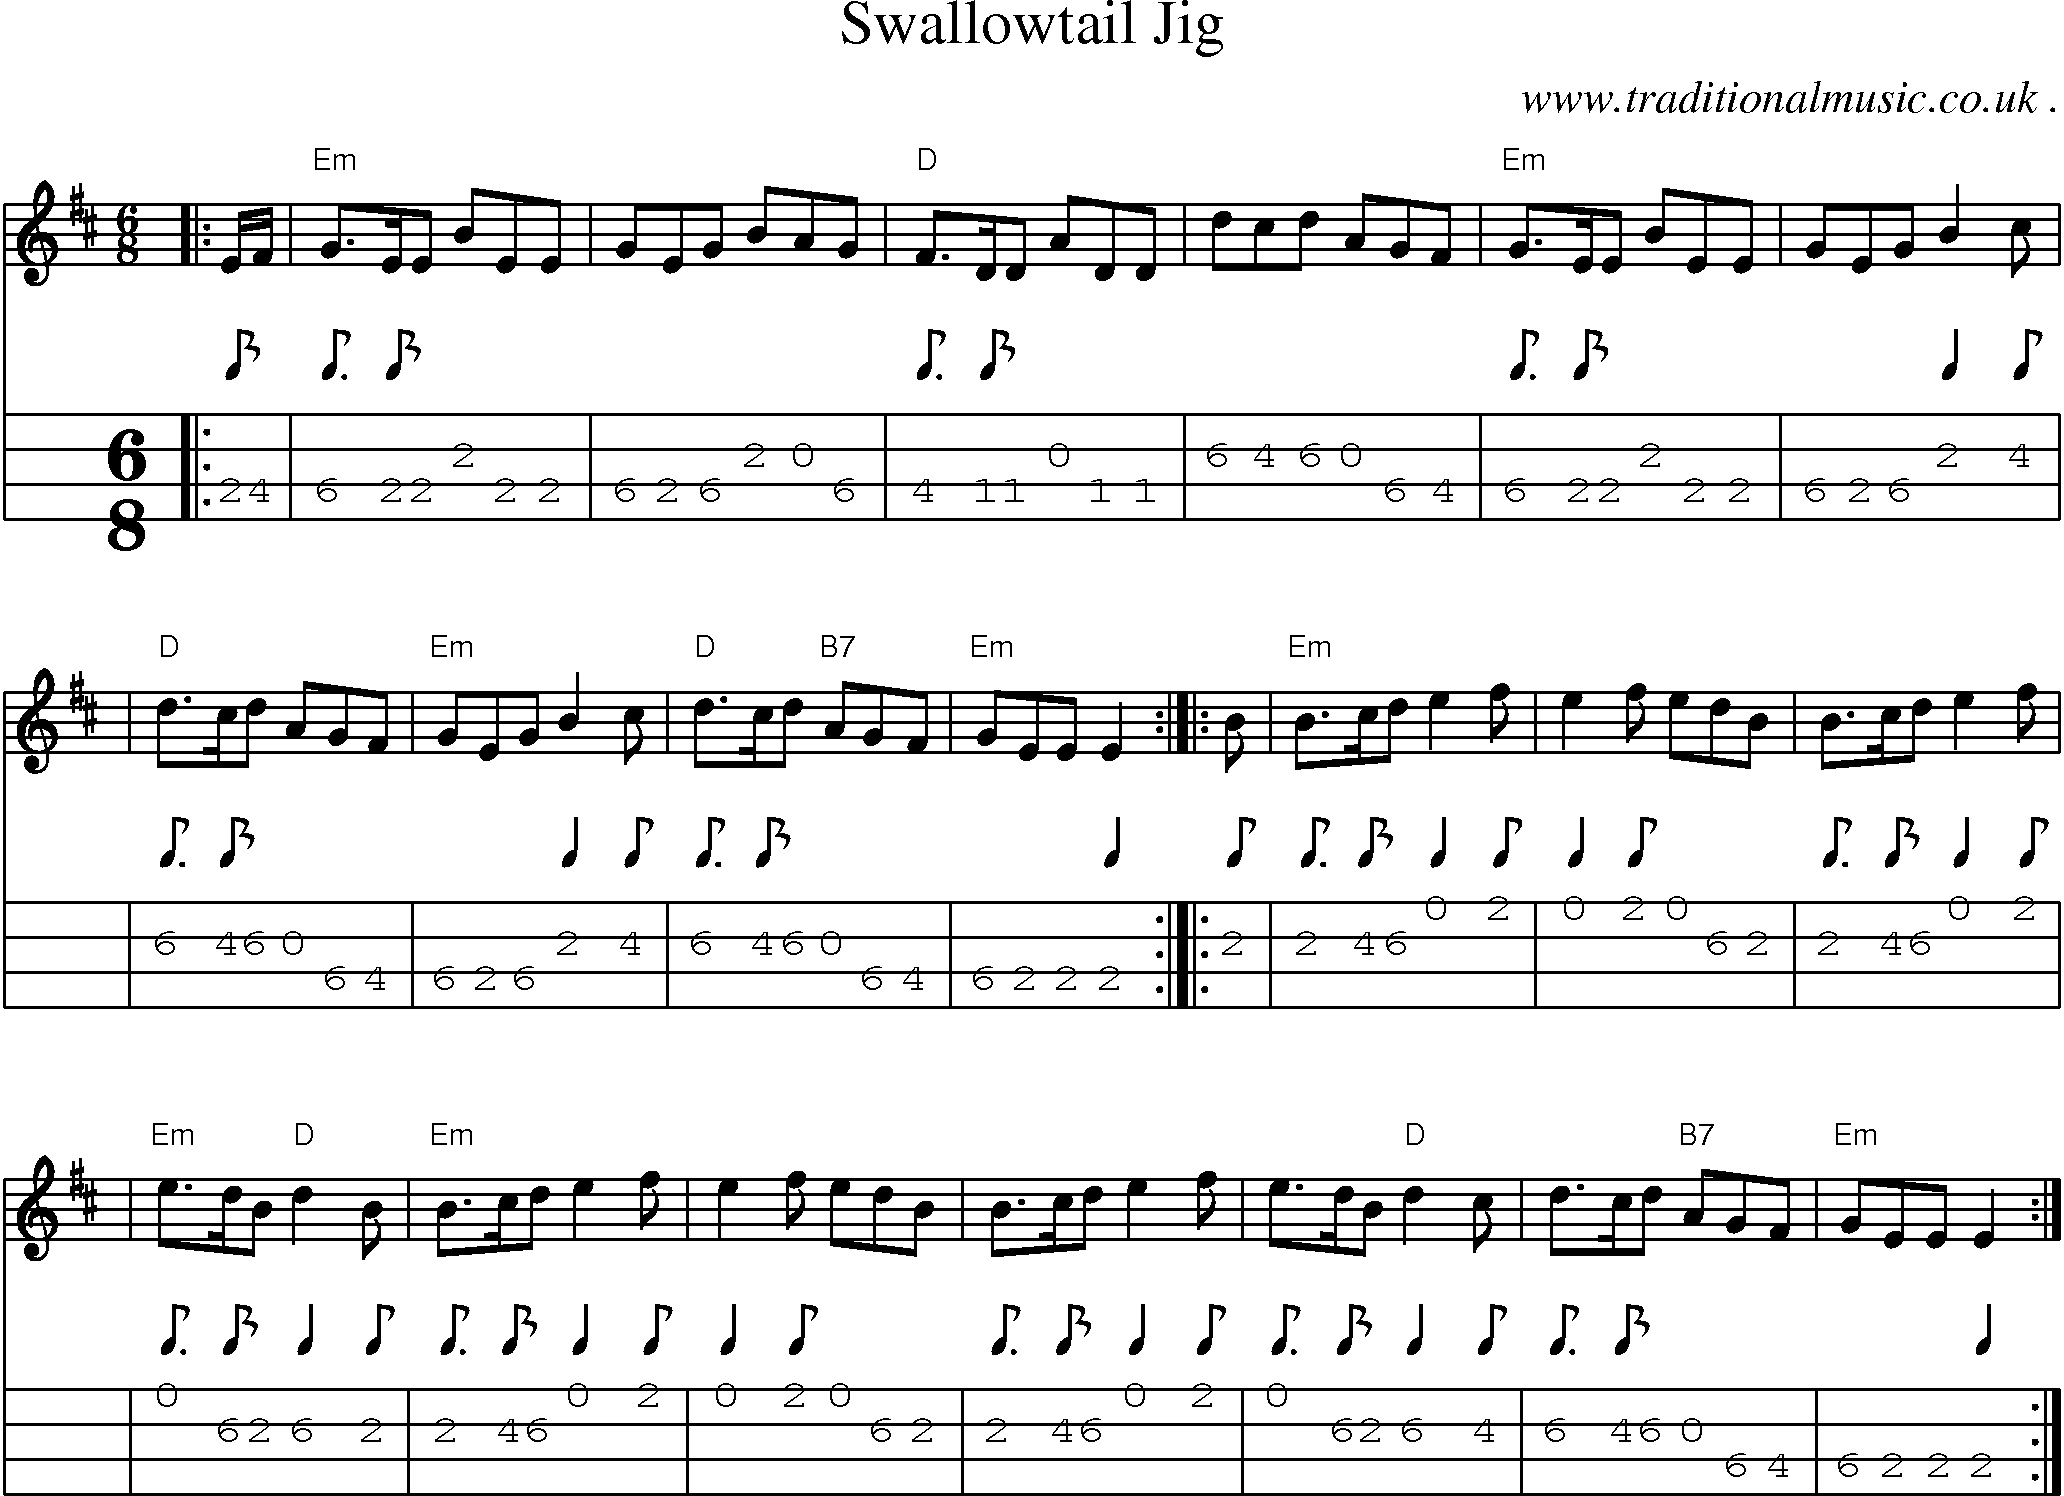 Sheet-music  score, Chords and Mandolin Tabs for Swallowtail Jig